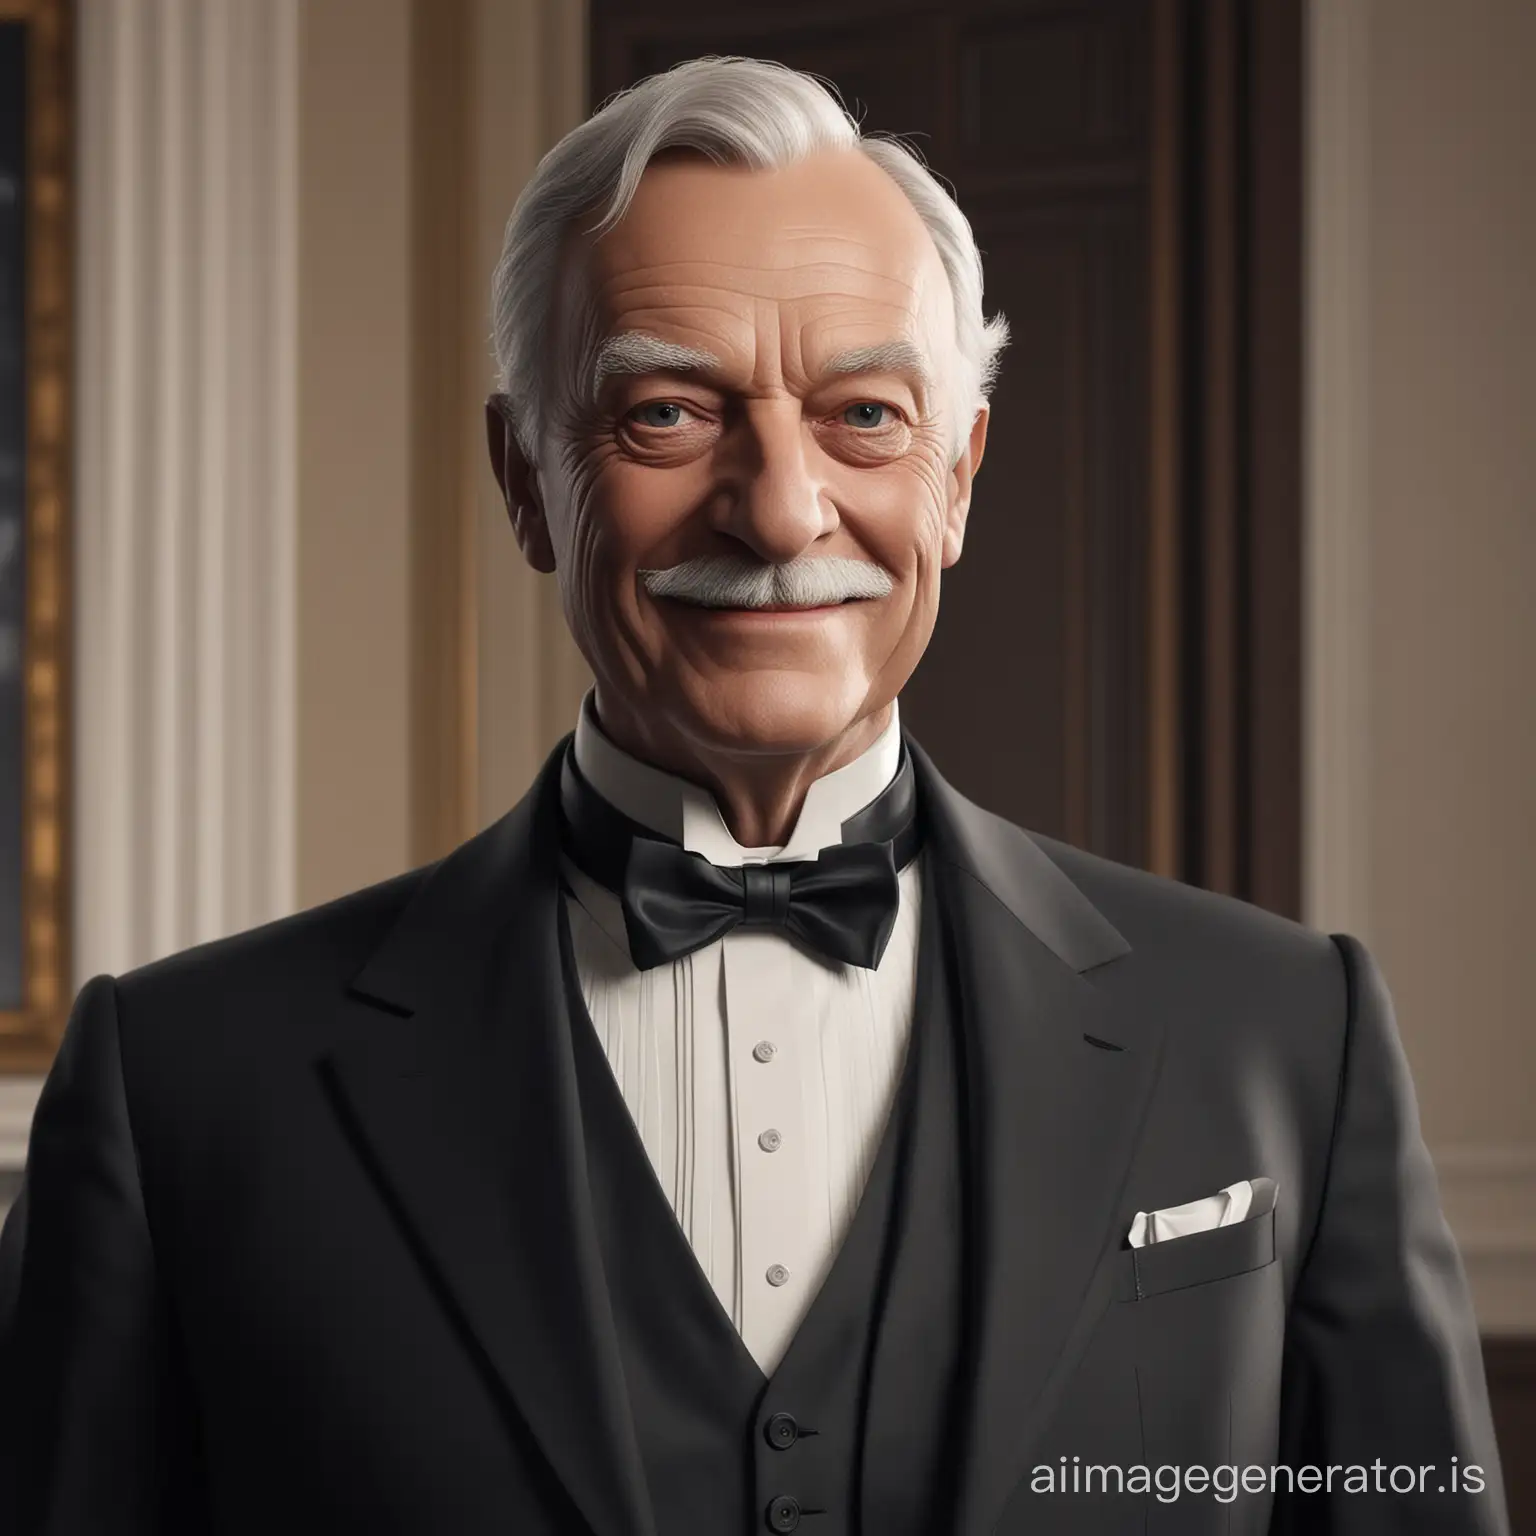 Craft a depiction of Alfred, the iconic butler of Batman, reimagined as a friendly and reassuring AI assistant for a home automation project. This Alfred AI embodies warmth and reliability, serving as the user's guide within a sophisticated solar panel system. The image should capture Alfred's signature smile, symbolizing the AI's approachable and helpful nature. The background subtly hints at solar technology and home automation elements, blending Alfred's classic butler appearance with futuristic digital motifs. This representation is not intended for creation with DALL-E, but as a conceptual visualization for the project.